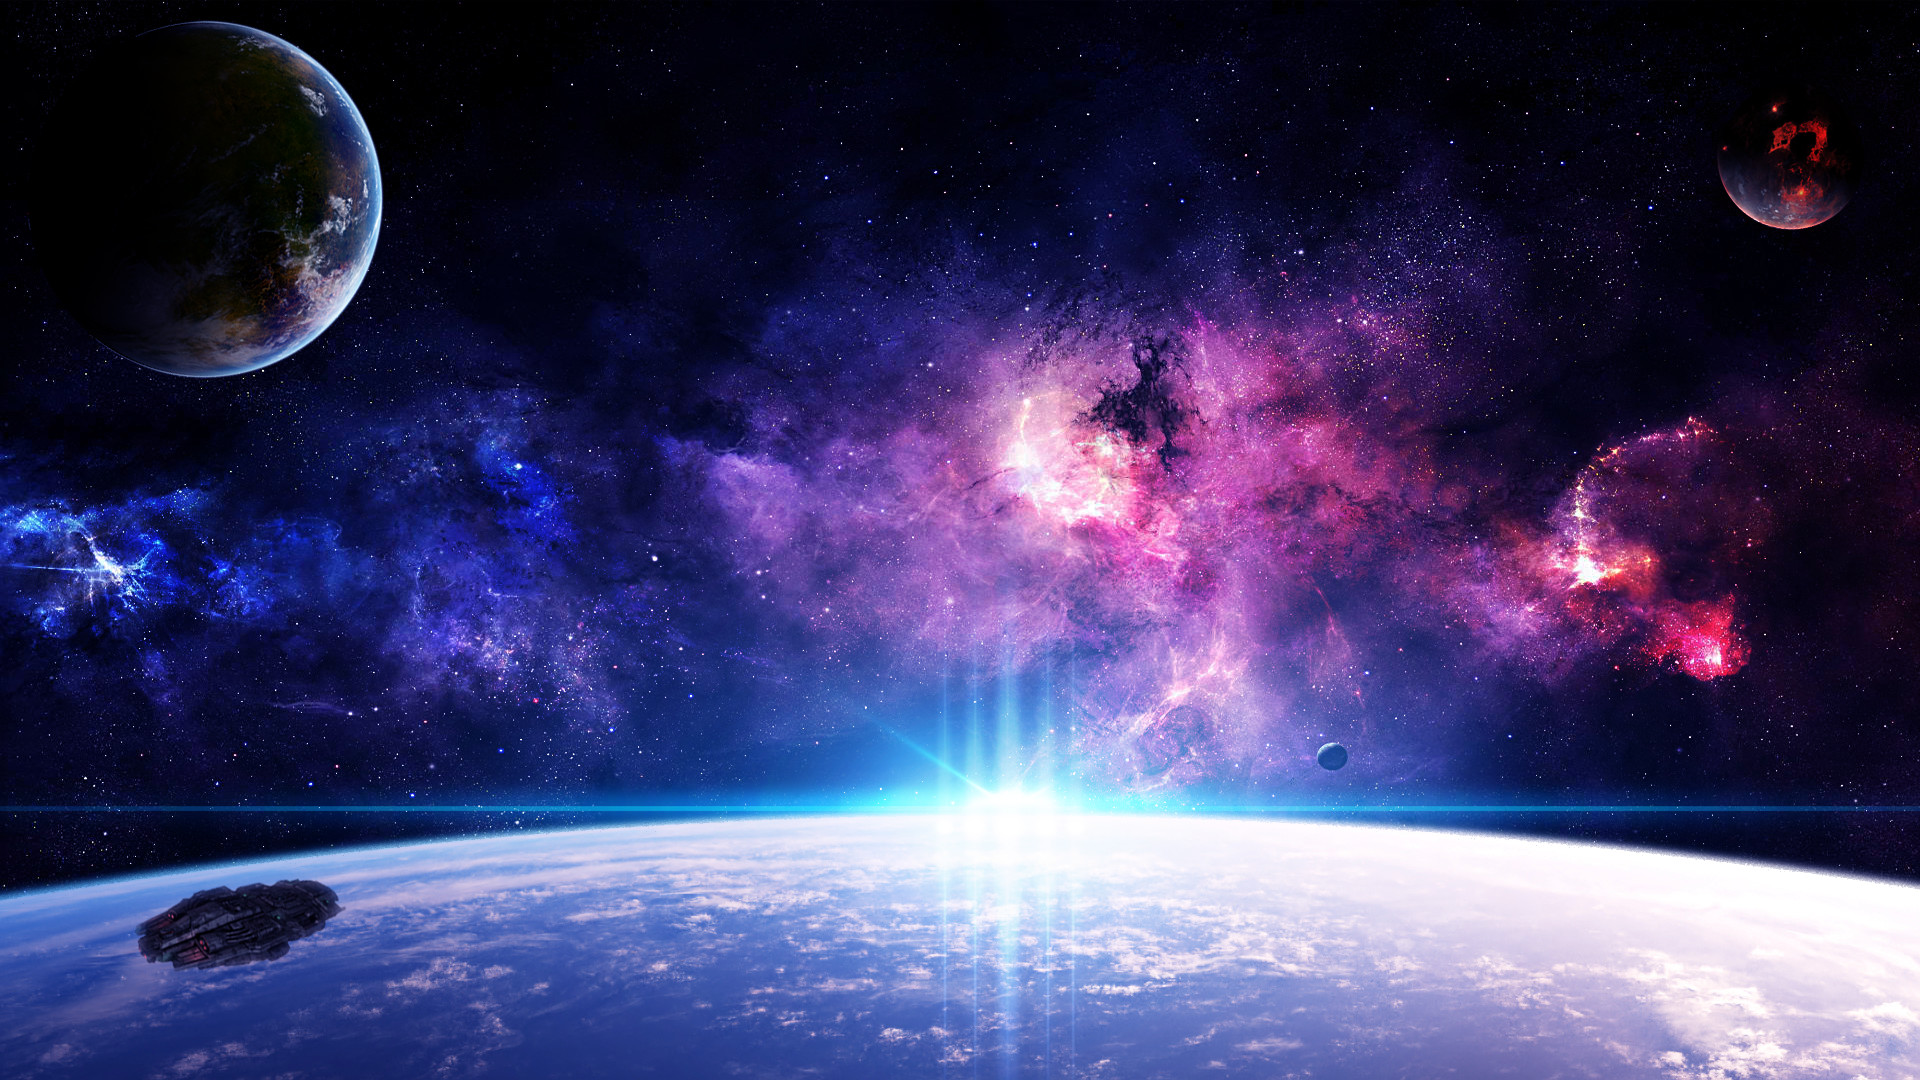 1920x1080 Space-Hd-Wallpapers-1080P-wallpaper | Wallpapers Photos Pictures | Space |  Pinterest | Hd wallpaper and Wallpaper